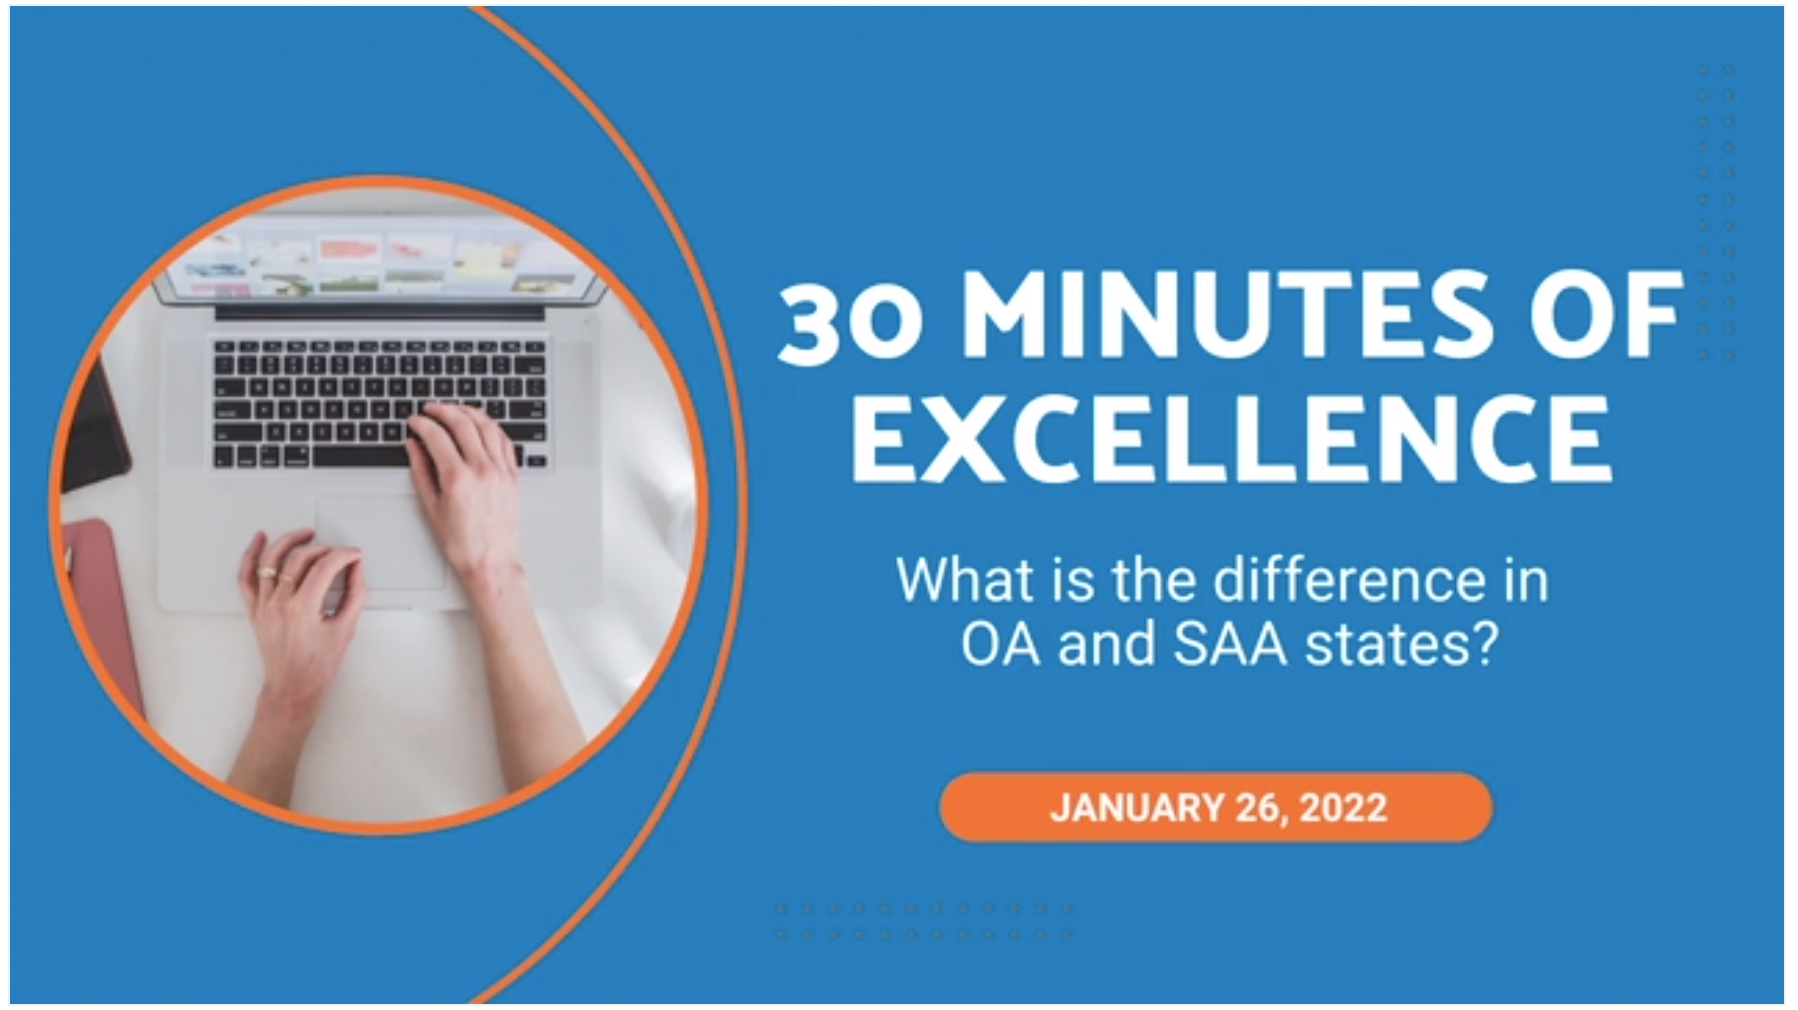 30 Minutes of Excellence, January 26, 2022